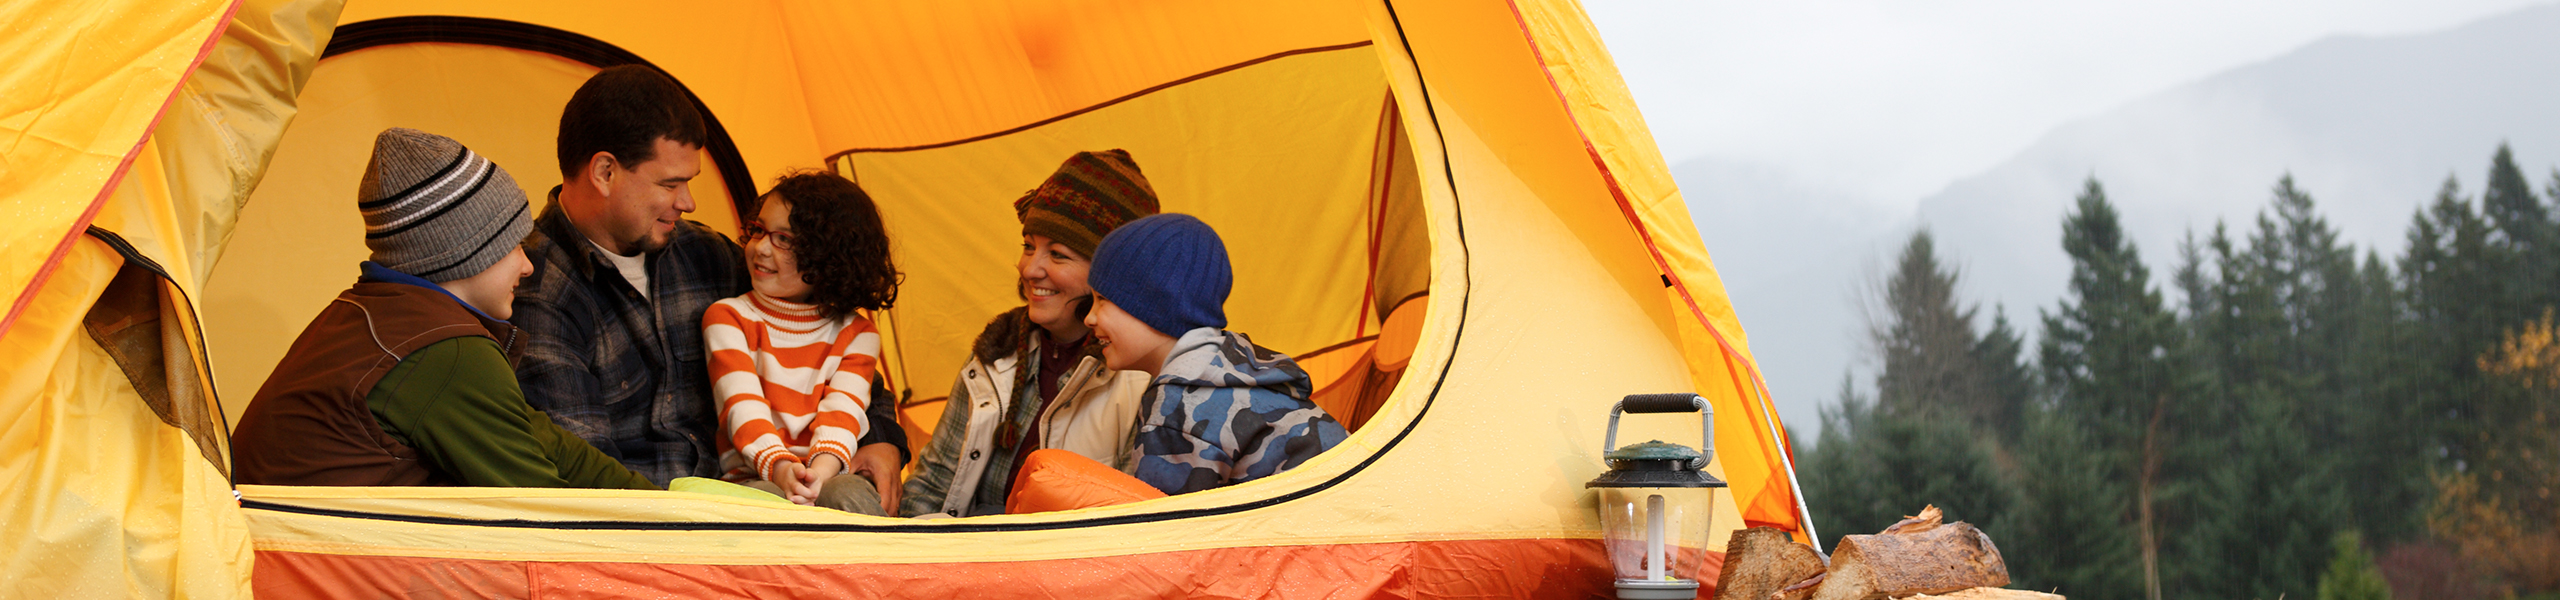 A happy family in a tent on a camping trip